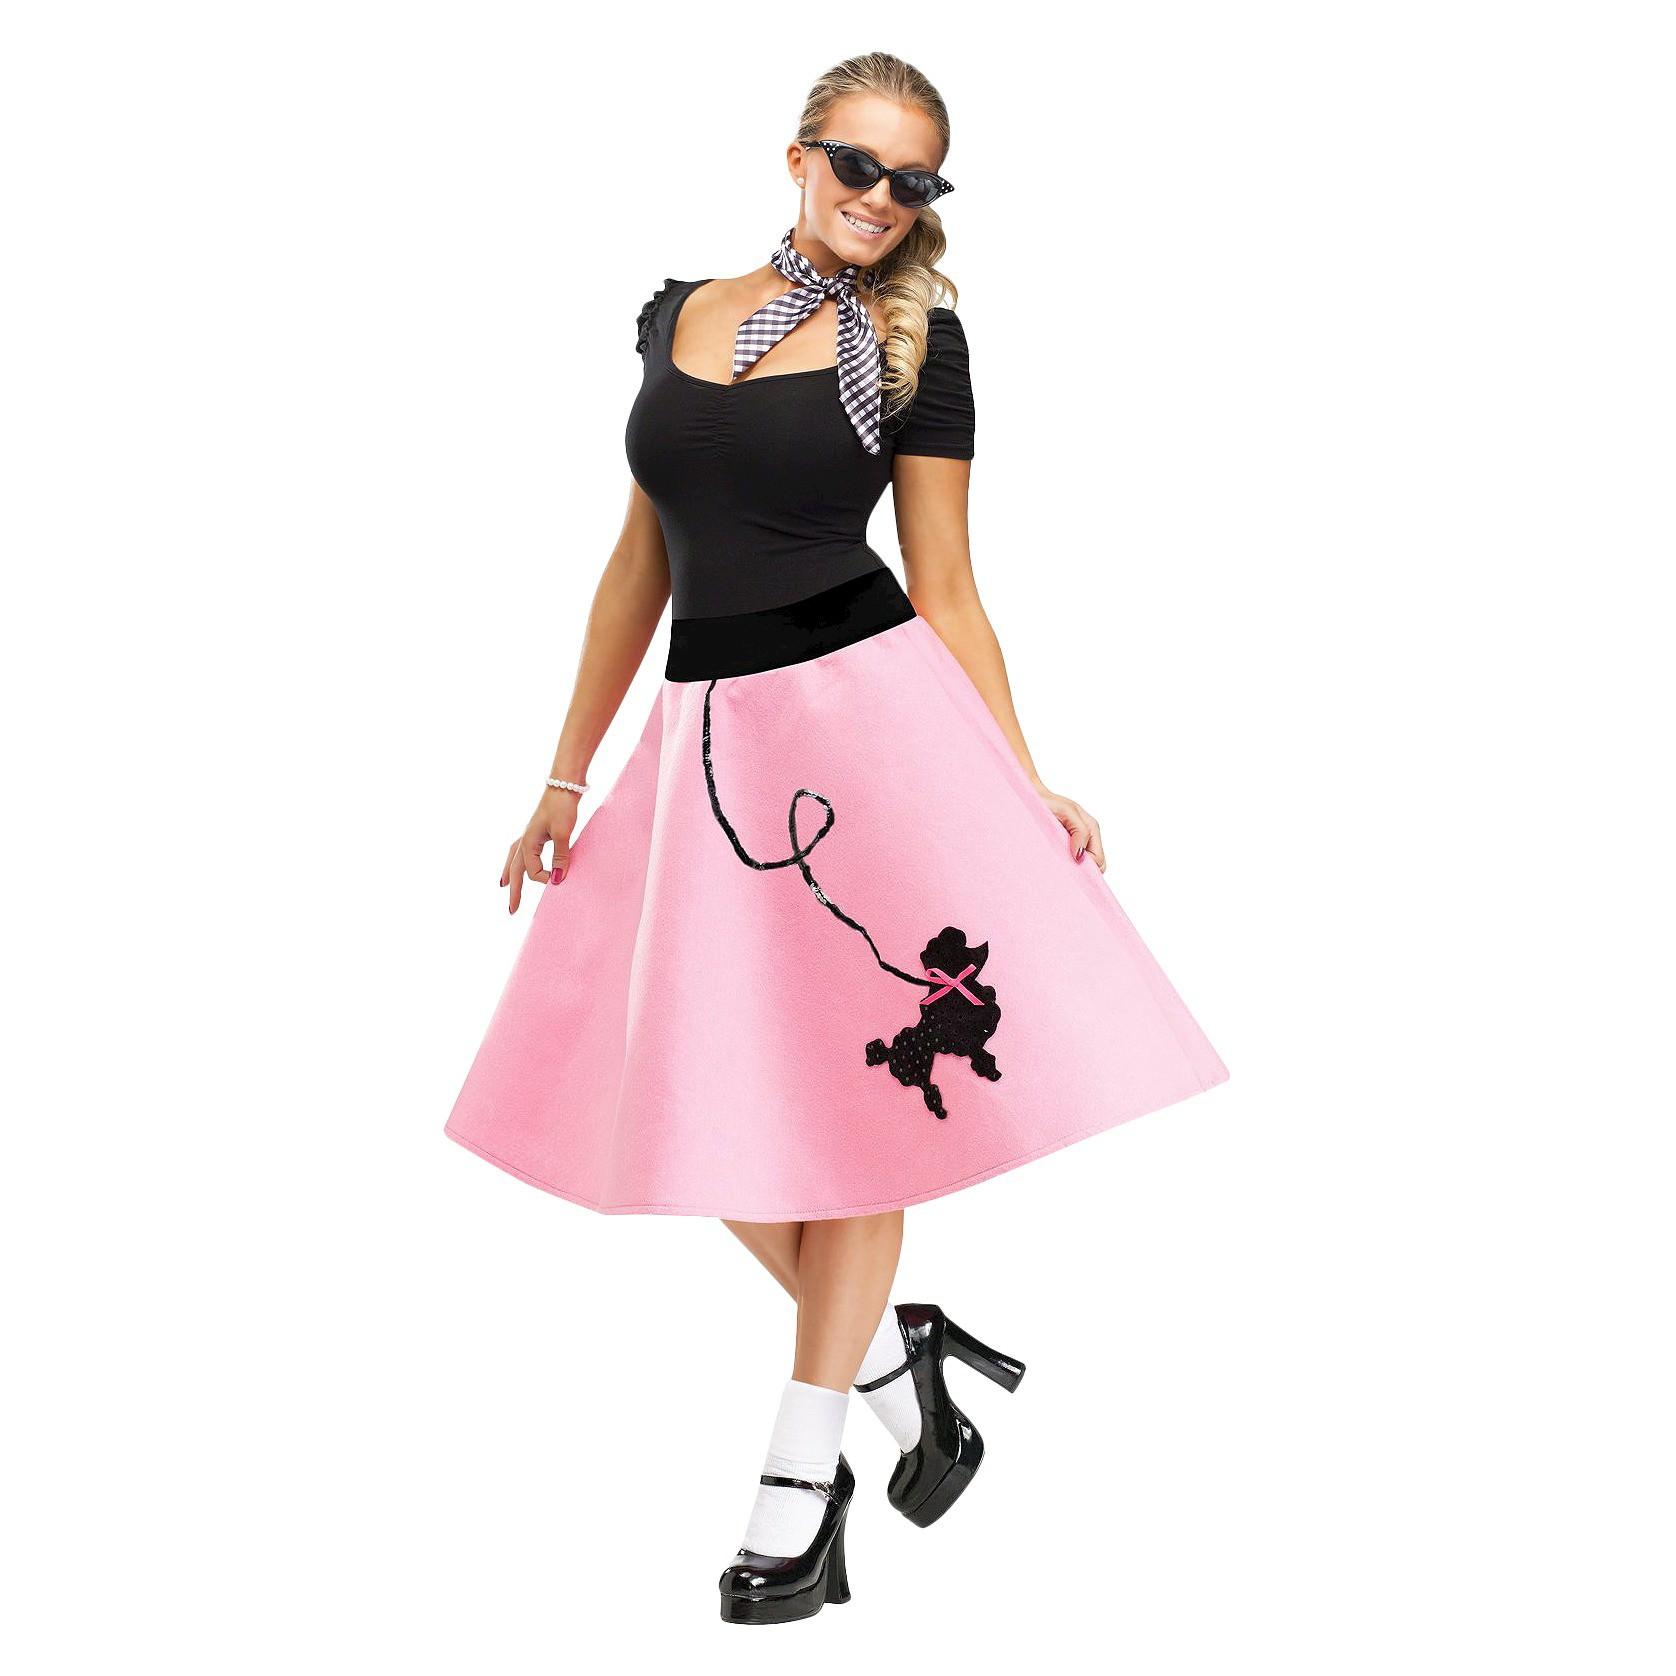 Ms. 1950s Poodle Skirt Adult Costume [Historical Costumes] - In Stock in  2024 | Poodle skirt, Poodle skirt outfit, 1950s poodle skirt